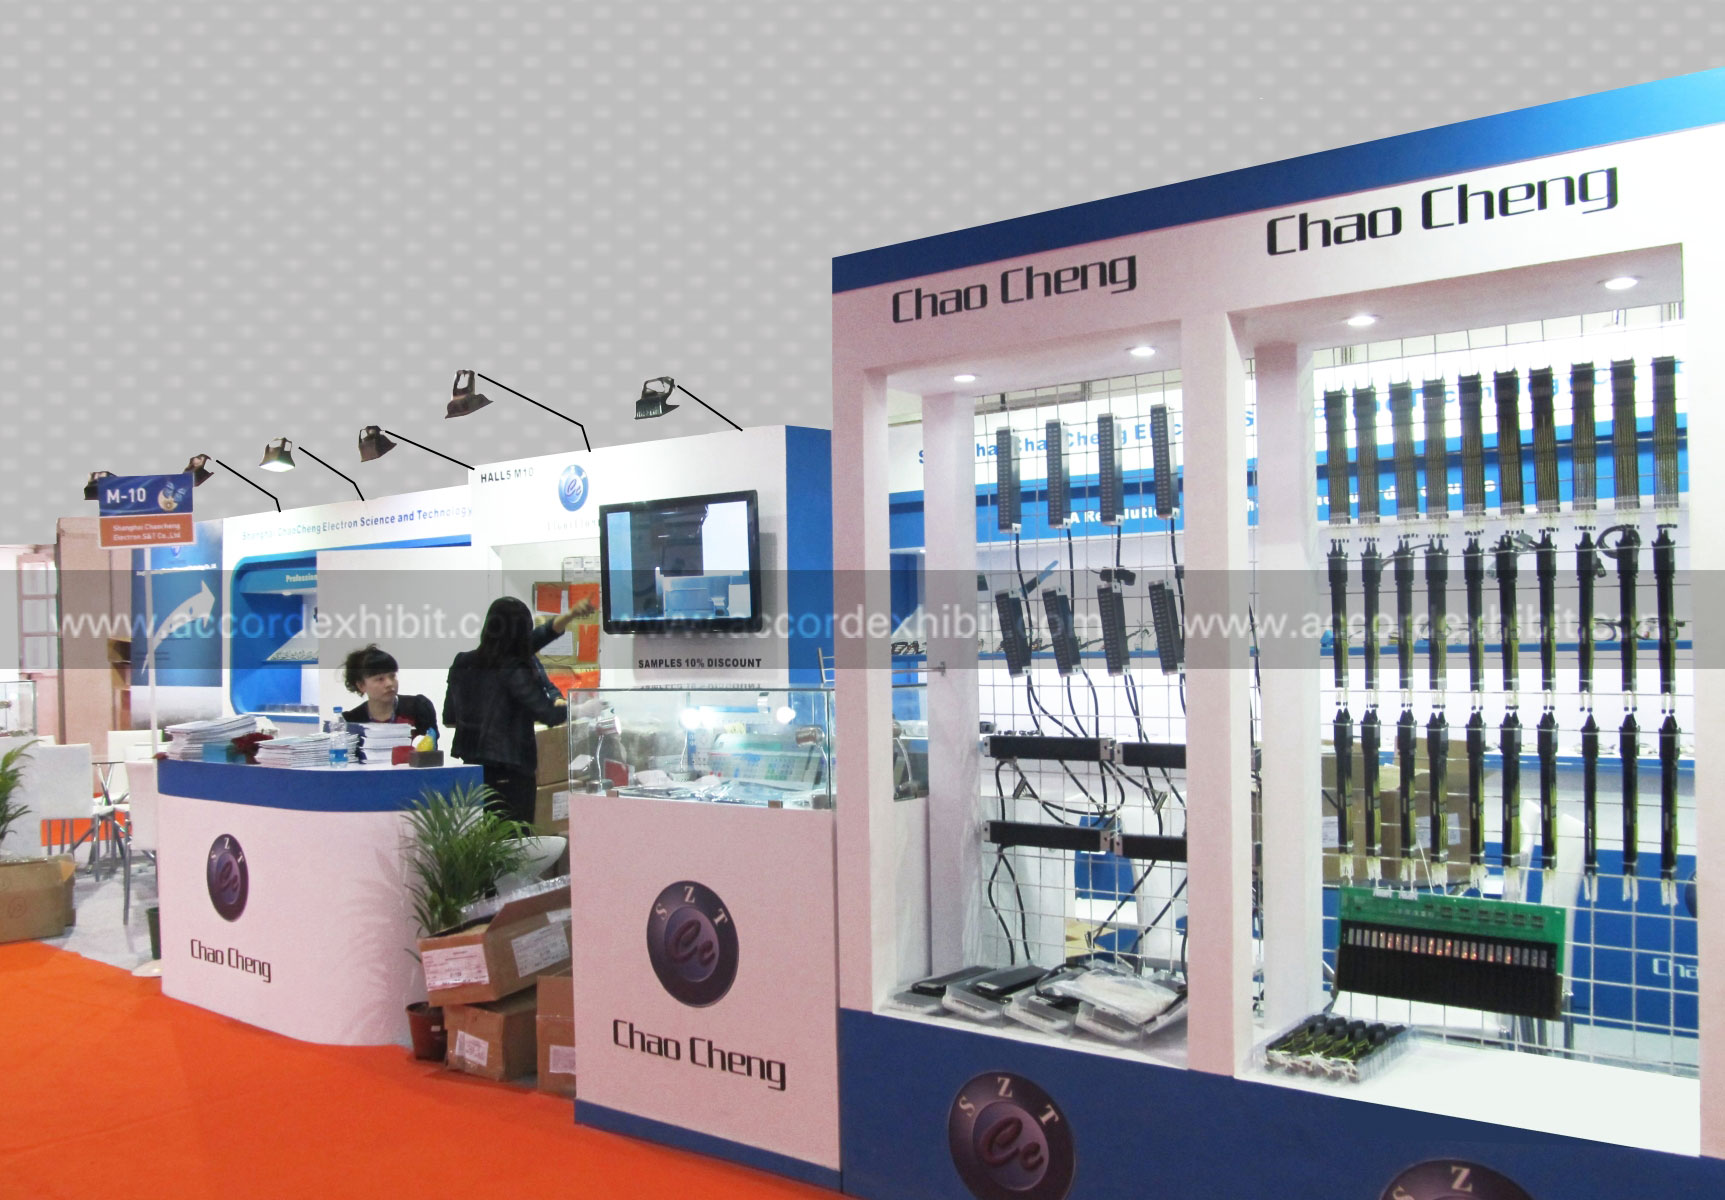 Exhibition Stall for Chao Cheng